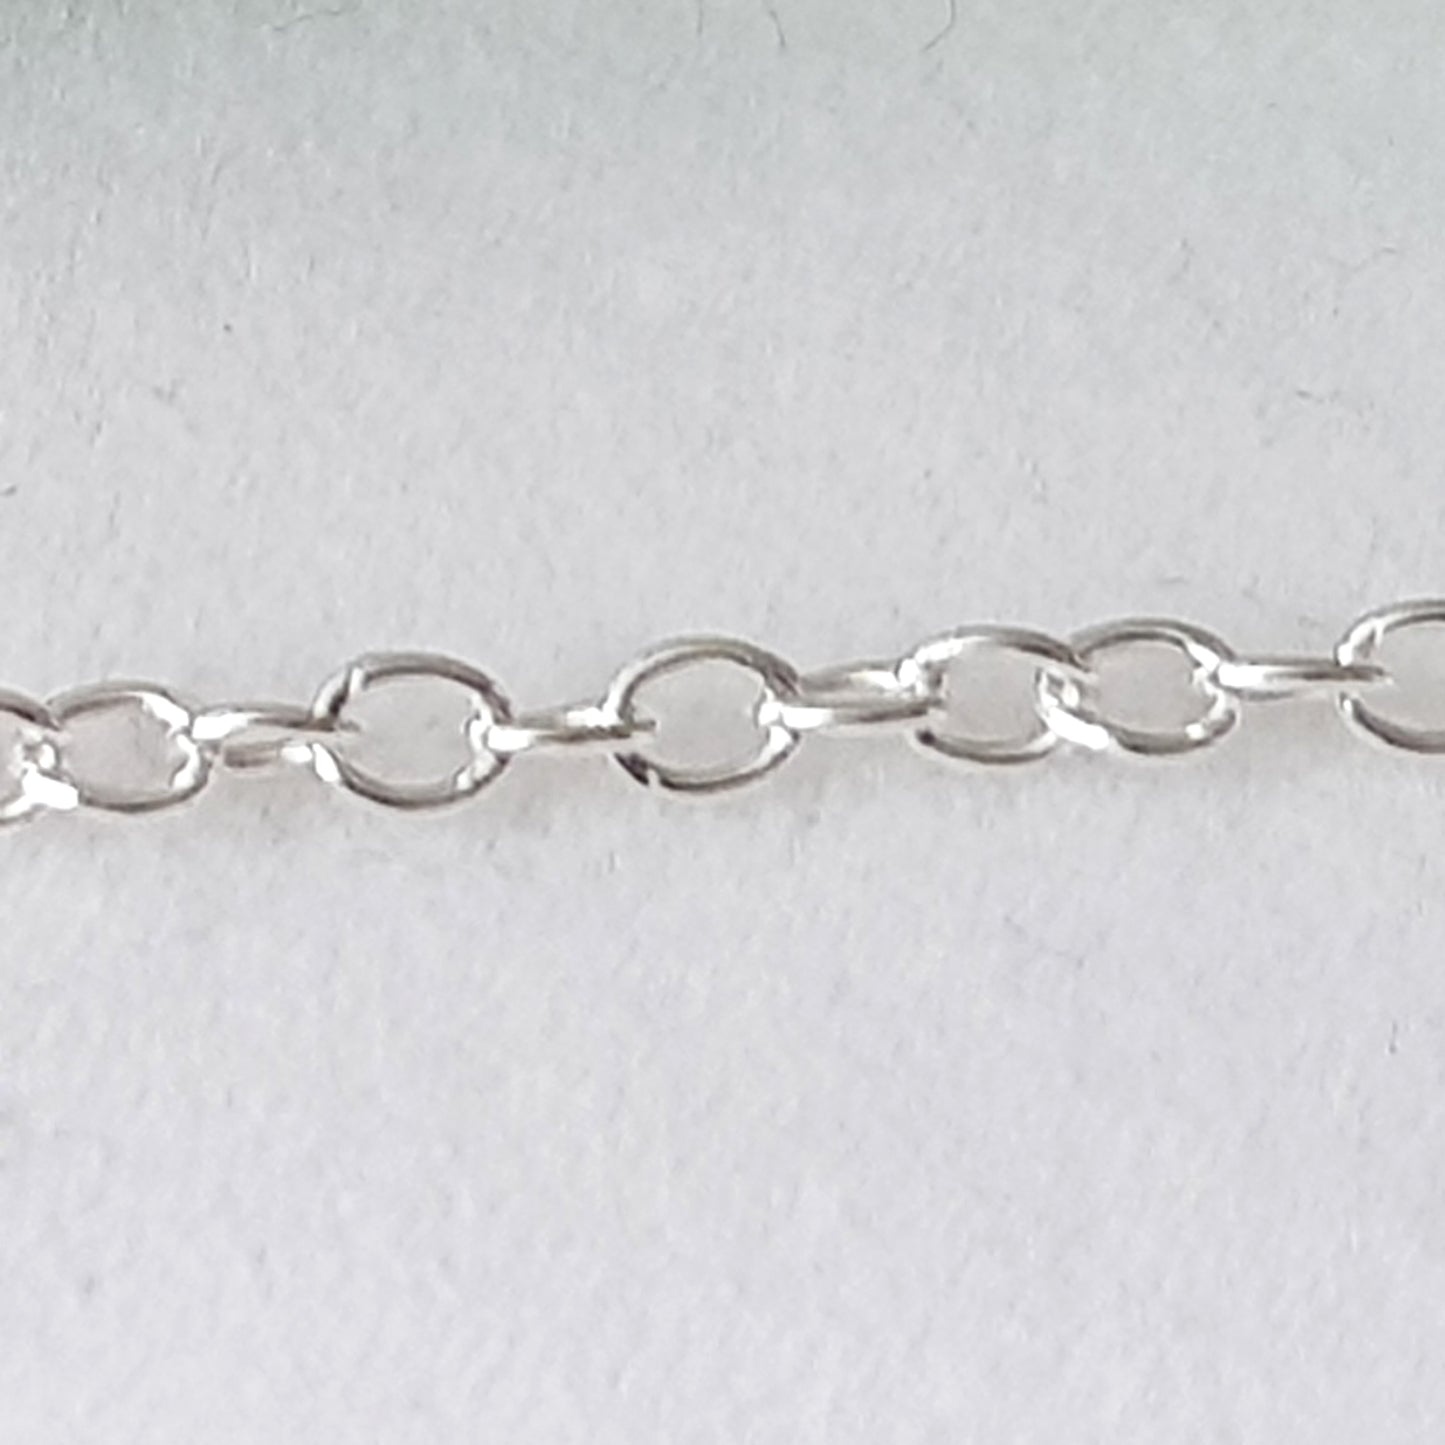 Chains - Long Cable Chain Genuine Sterling Silver Unfinished | Jewellery Making Supply